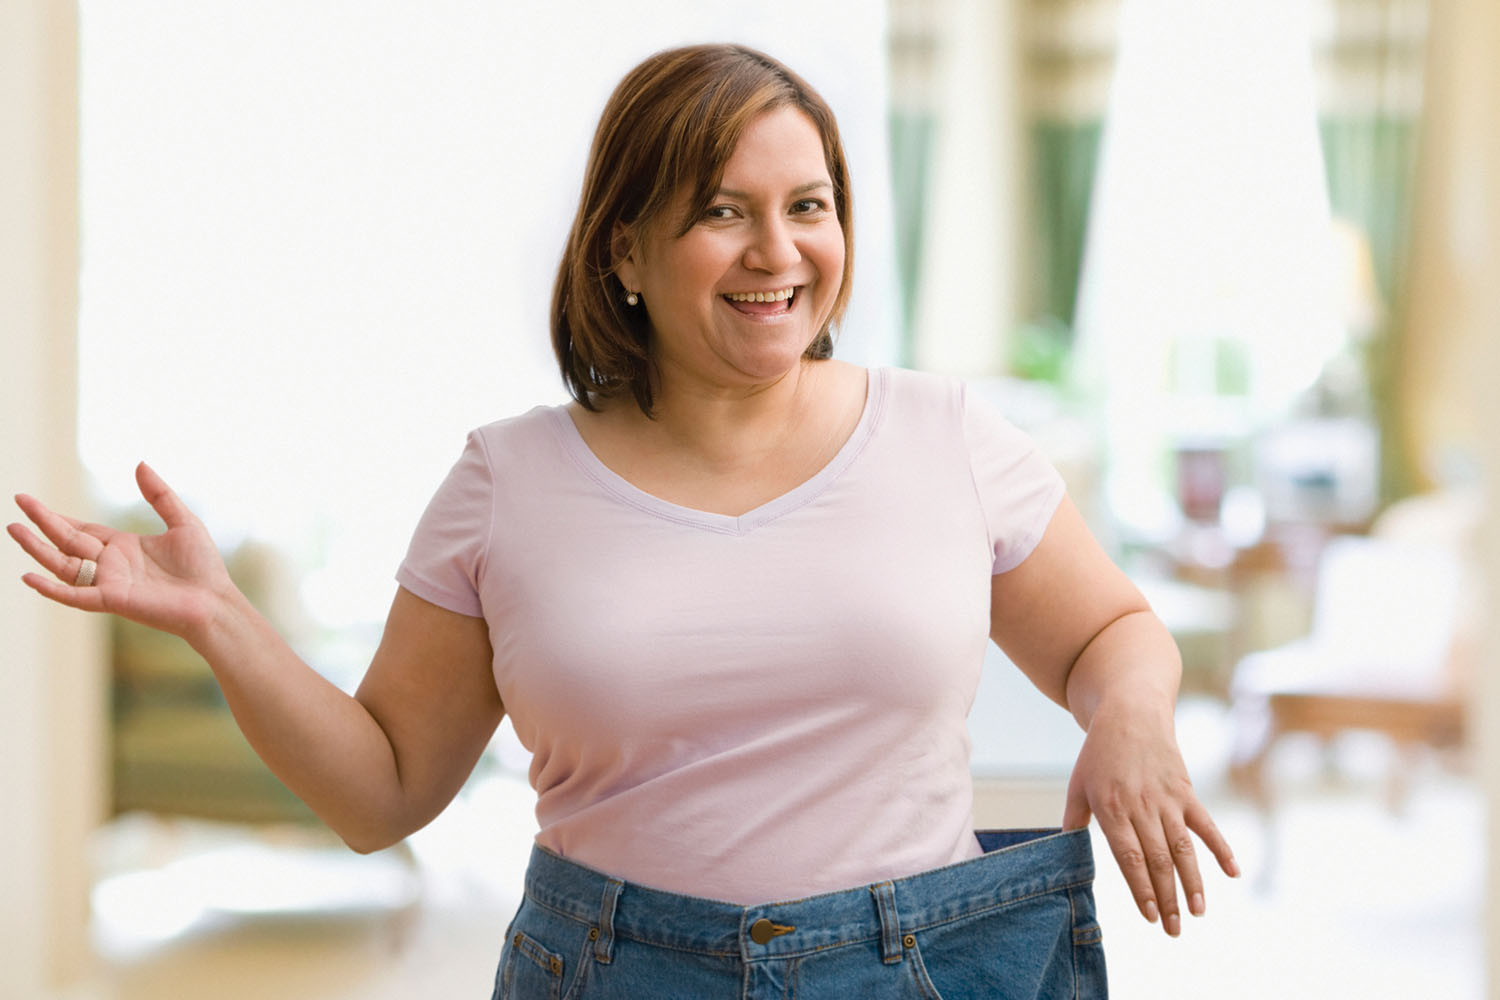 photo of a smiling woman showing off weight loss by holding out the waist of the pants she is wearing that are now too big for her